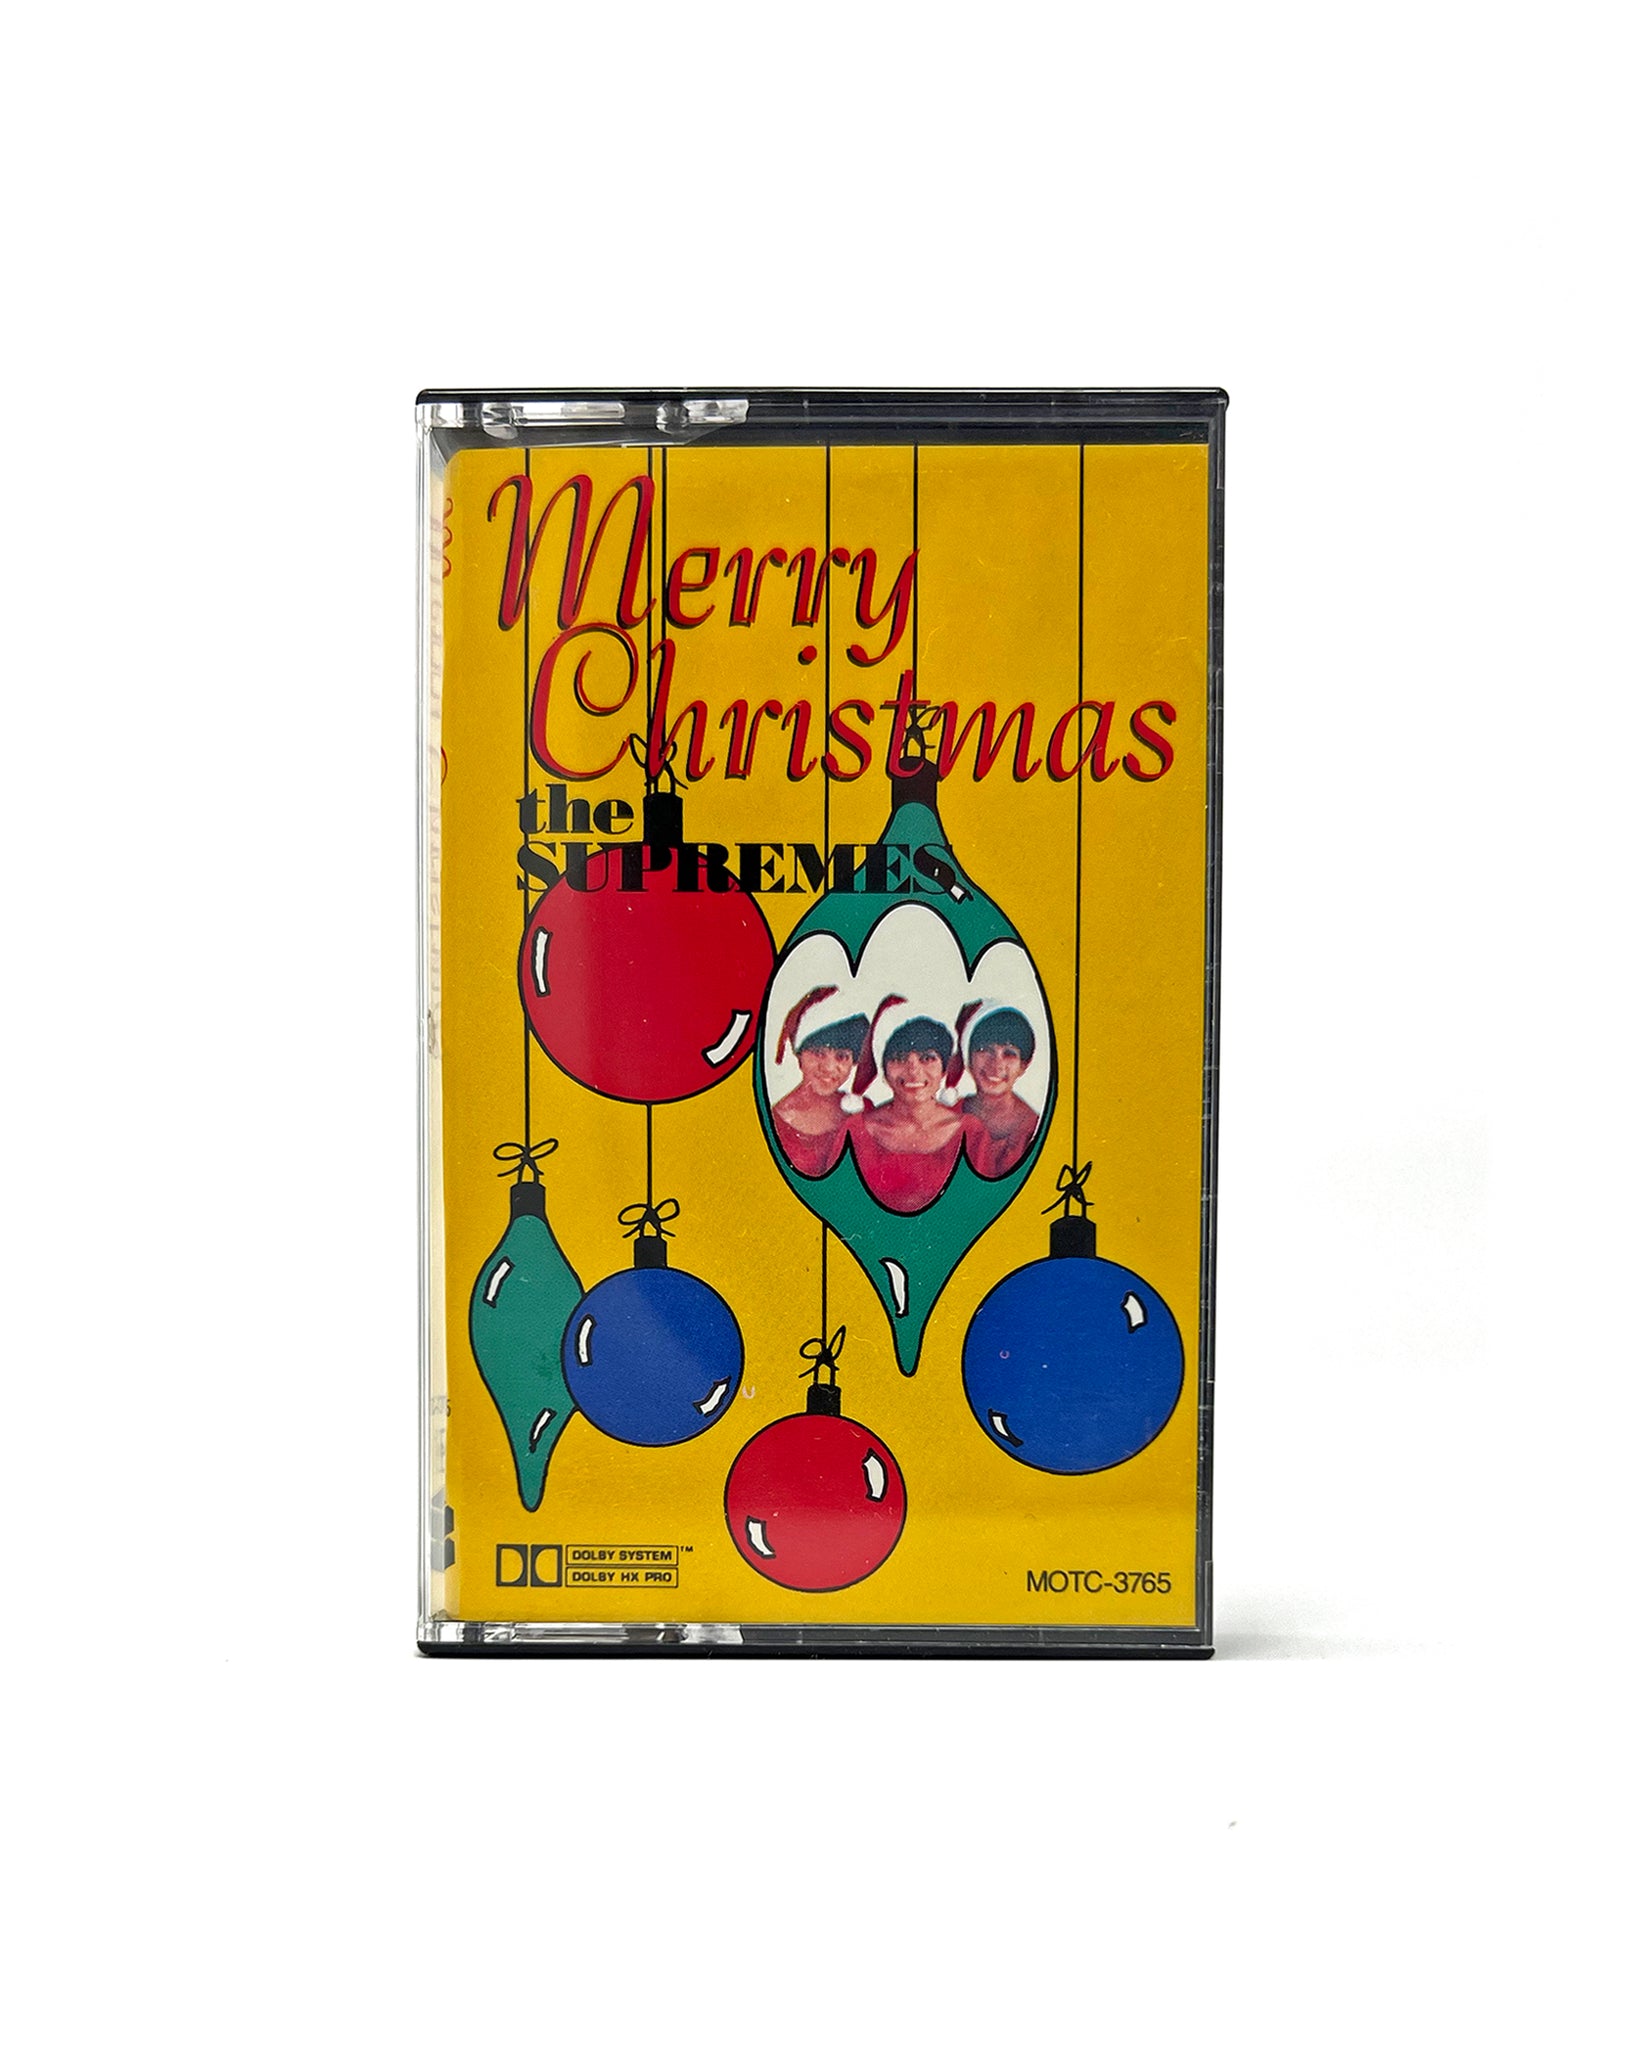 Vintage Holiday Cassette Tape: "Merry Christmas" - Supremes